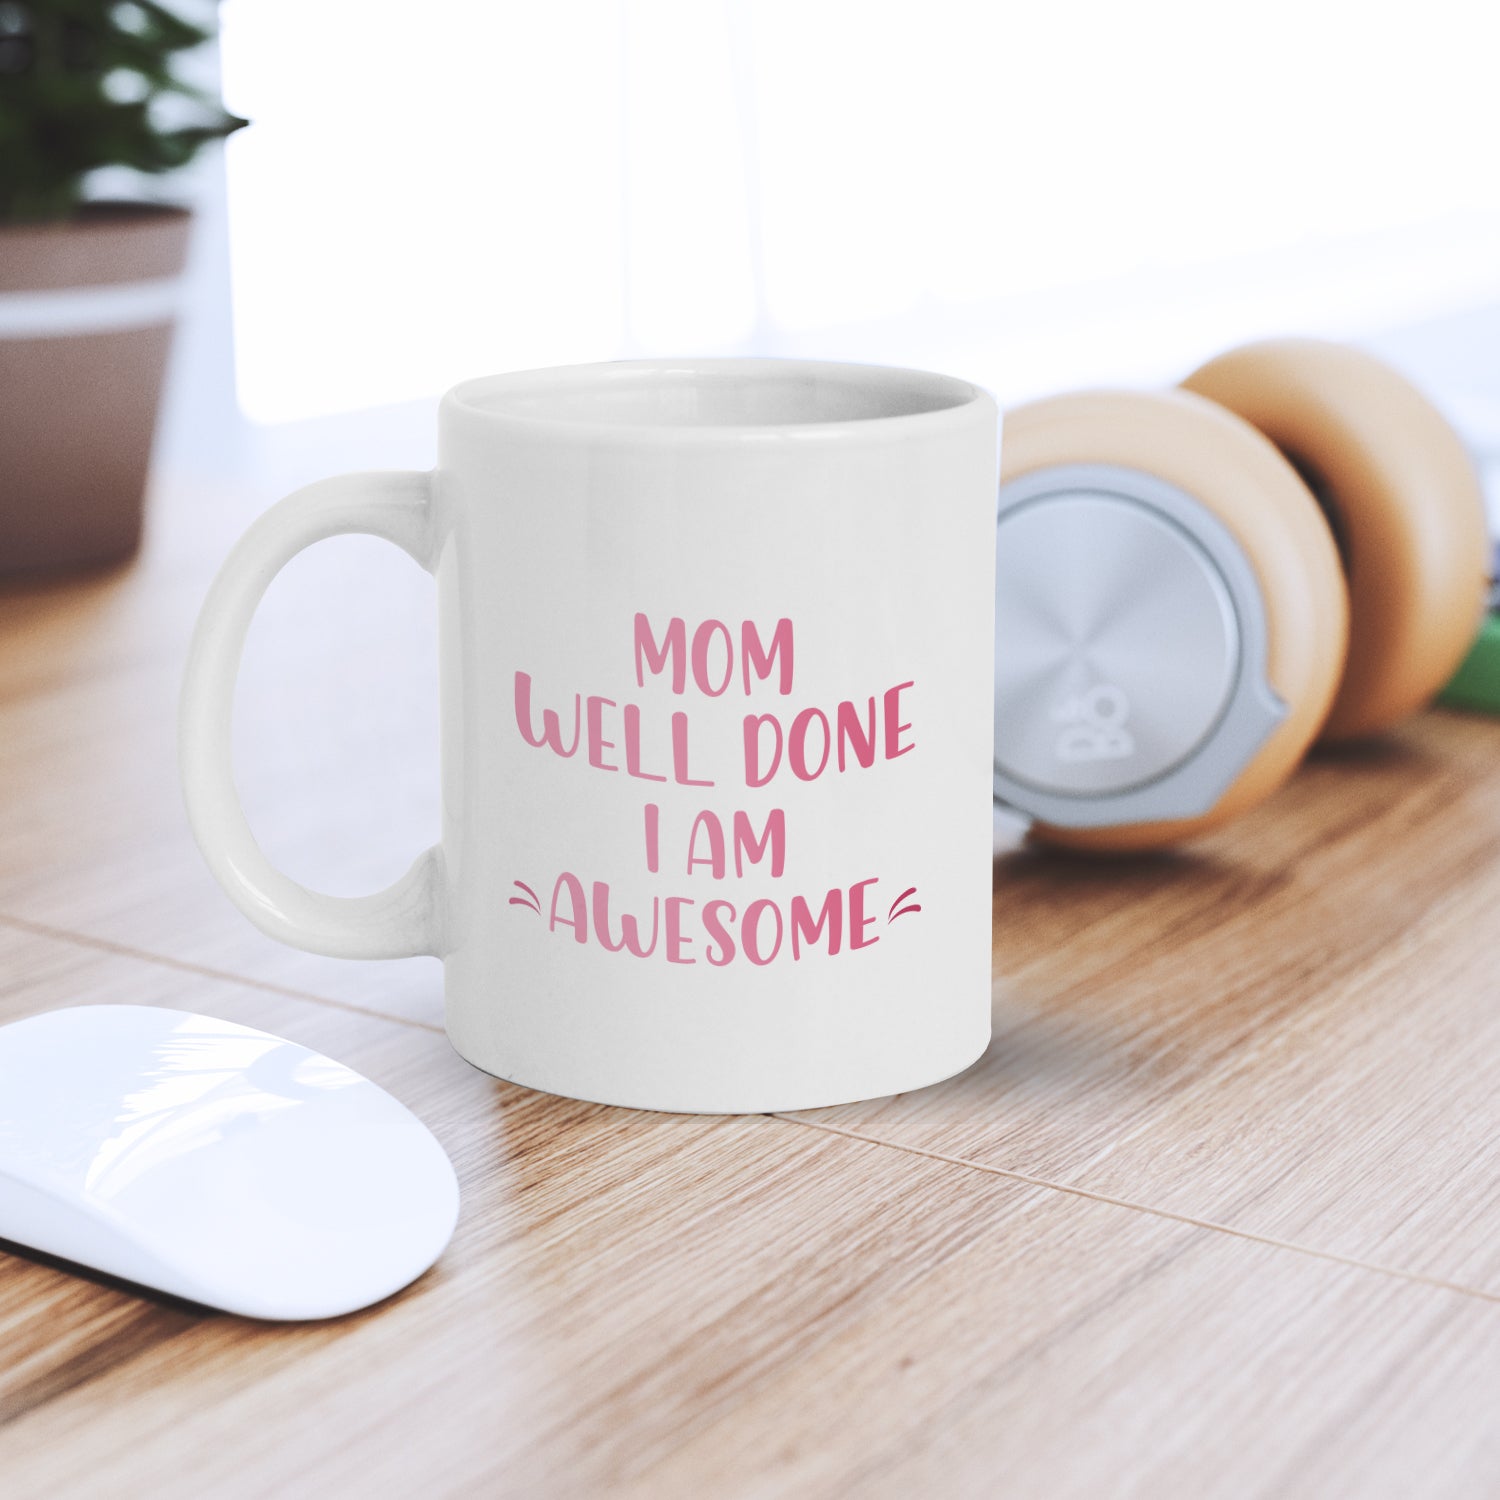 "Mom well done I am Awesome" Mother's Day theme Ceramic Coffee Mugs